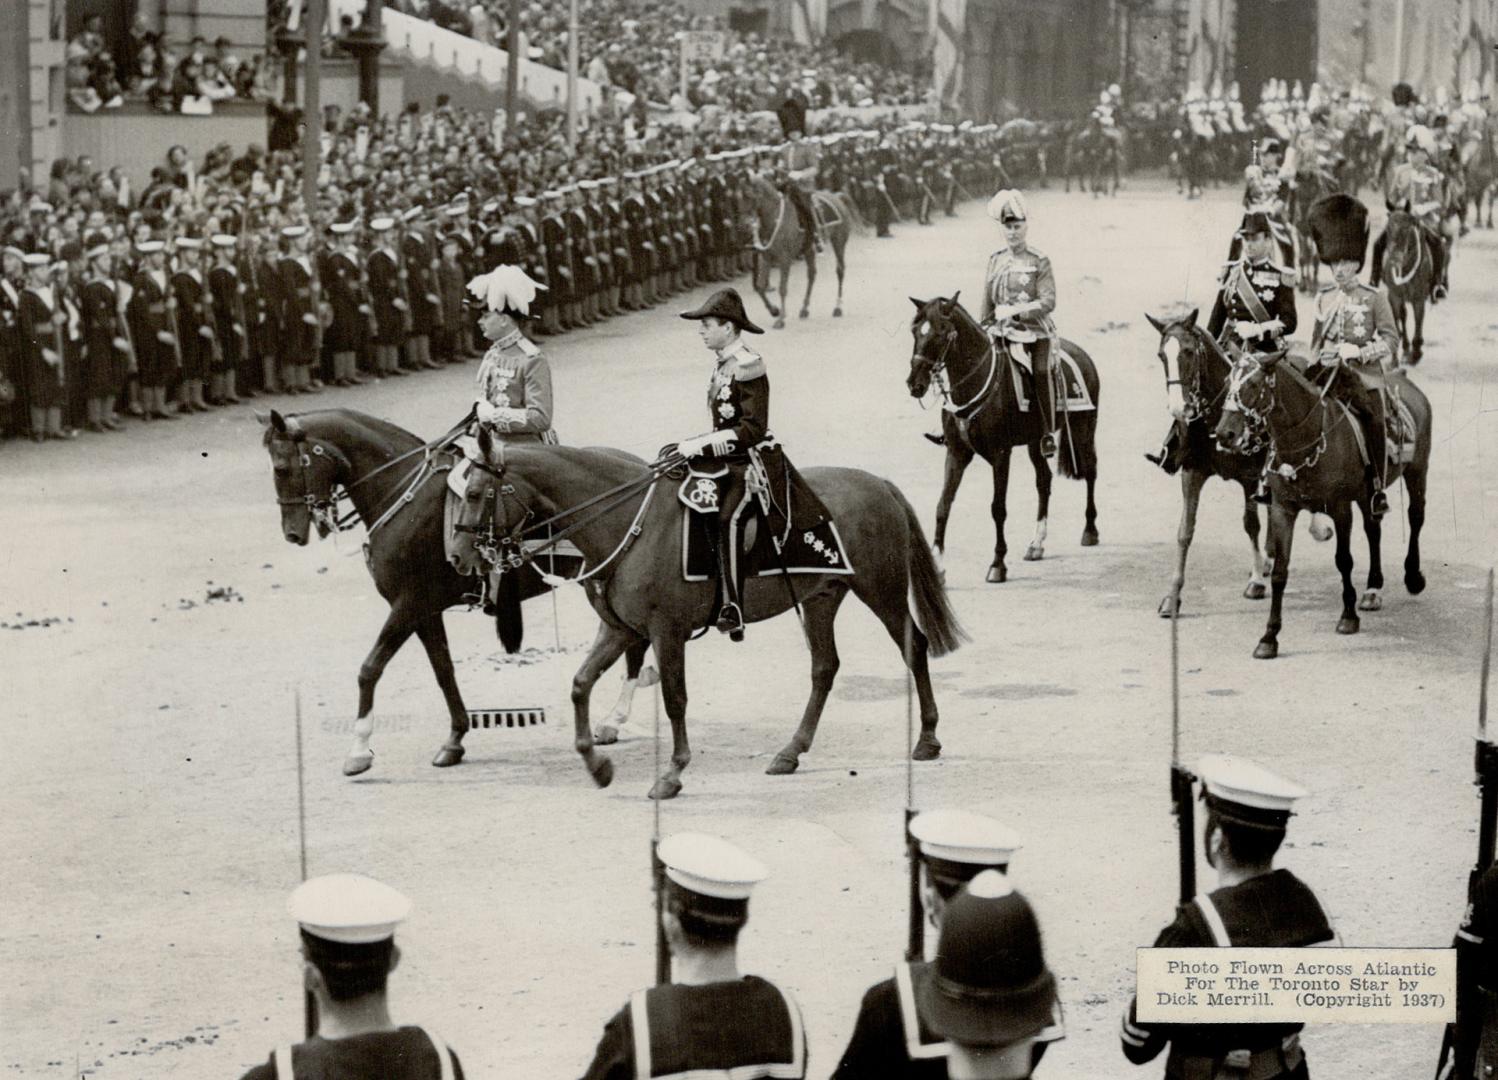 Henry, Duke of Gloucester and George, Duke of Kent, brothers of the King, riding in the procession en route to Westminister Abbey. [Incomplete]